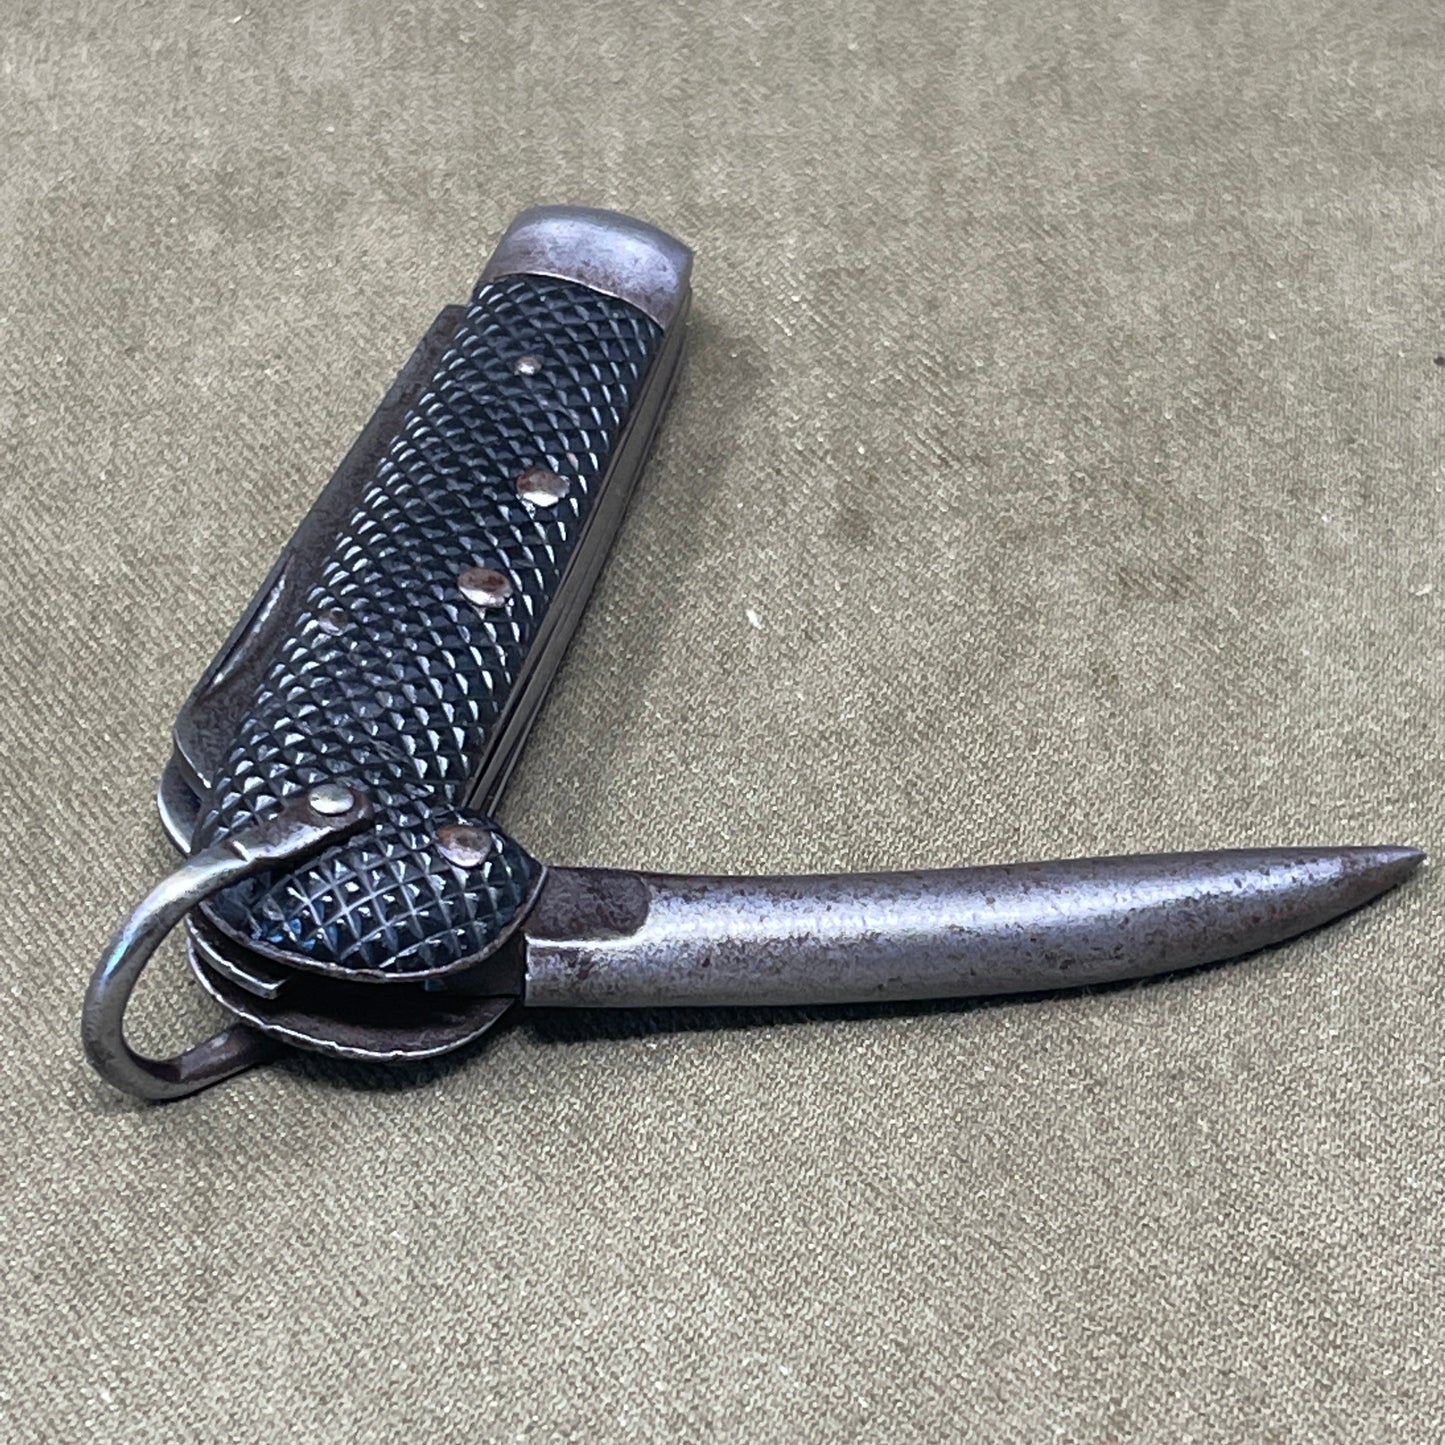 A nice example of a British 1942 Dated Pocket Jack Knife made by Clarke & Son of Sheffield  The blades are in good condition, the chequered Bakelite grip is intact and all the blades lock and close as they should. The steel can opener is in good condition